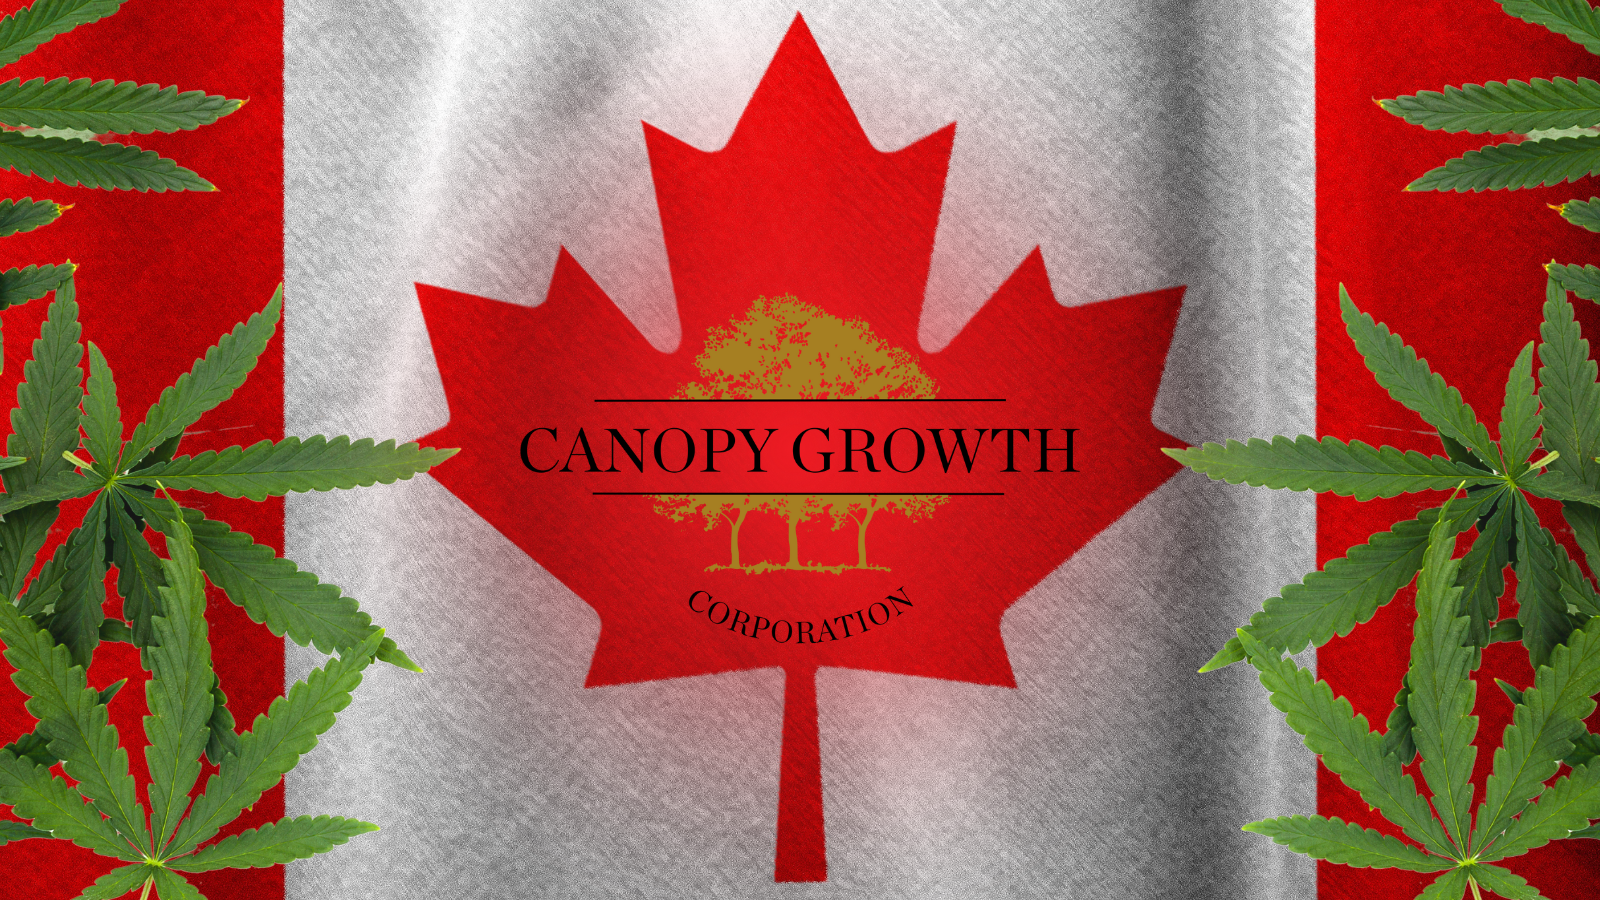 Canada’s Canopy Growth expands cannabis offerings in Quebec